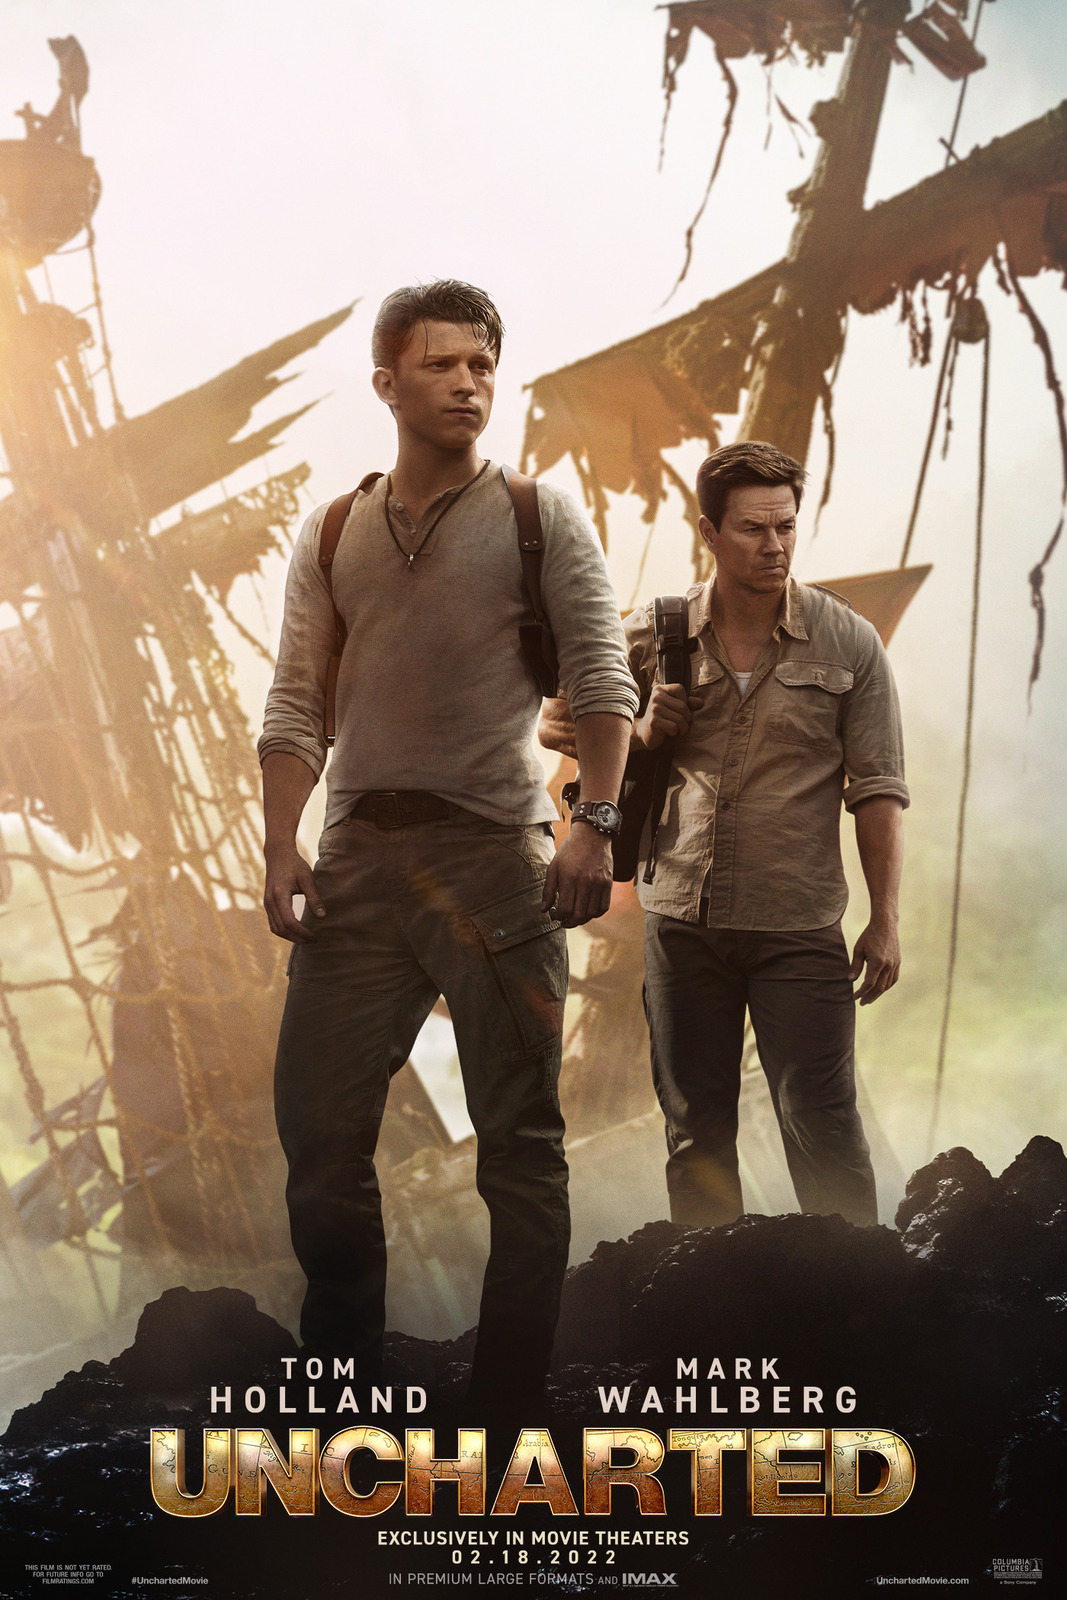 Uncharted Poster Tom Holland Mark Wahlberg 2022 Movie Art Film Print 24x36 27x40